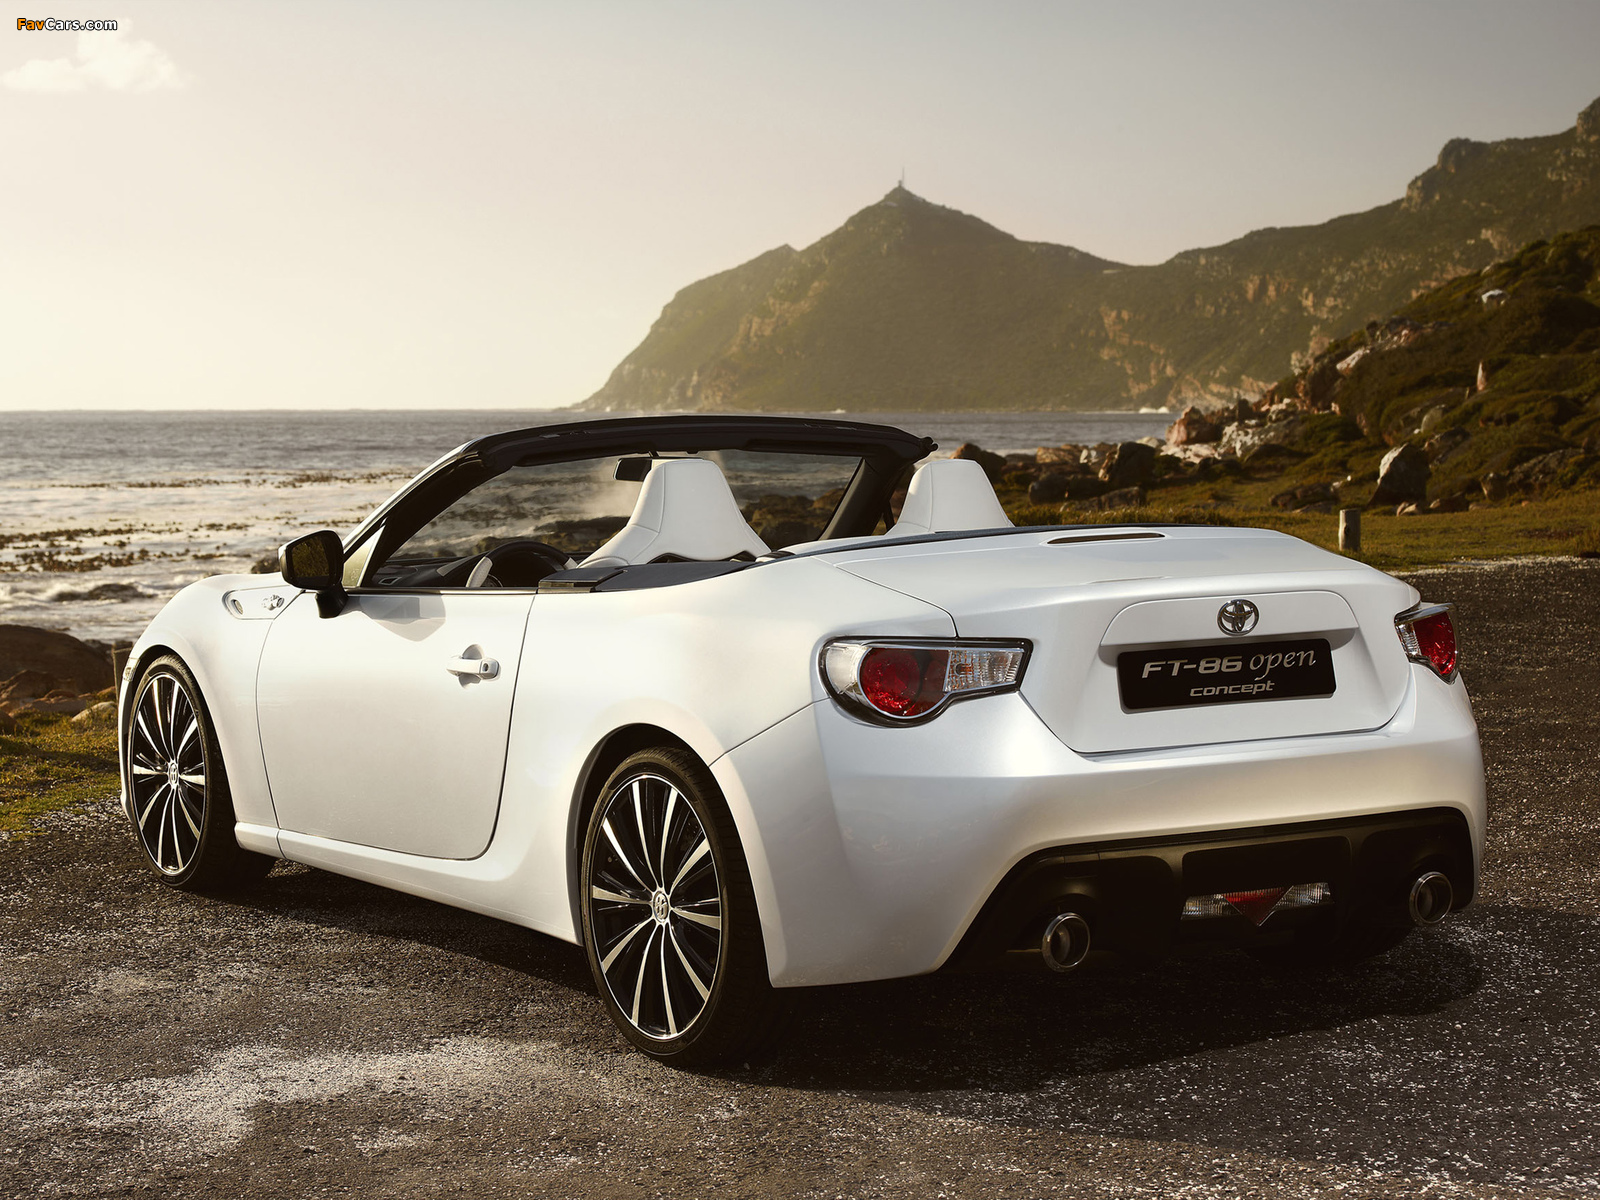 Toyota FT-86 Open Concept 2013 pictures (1600 x 1200)